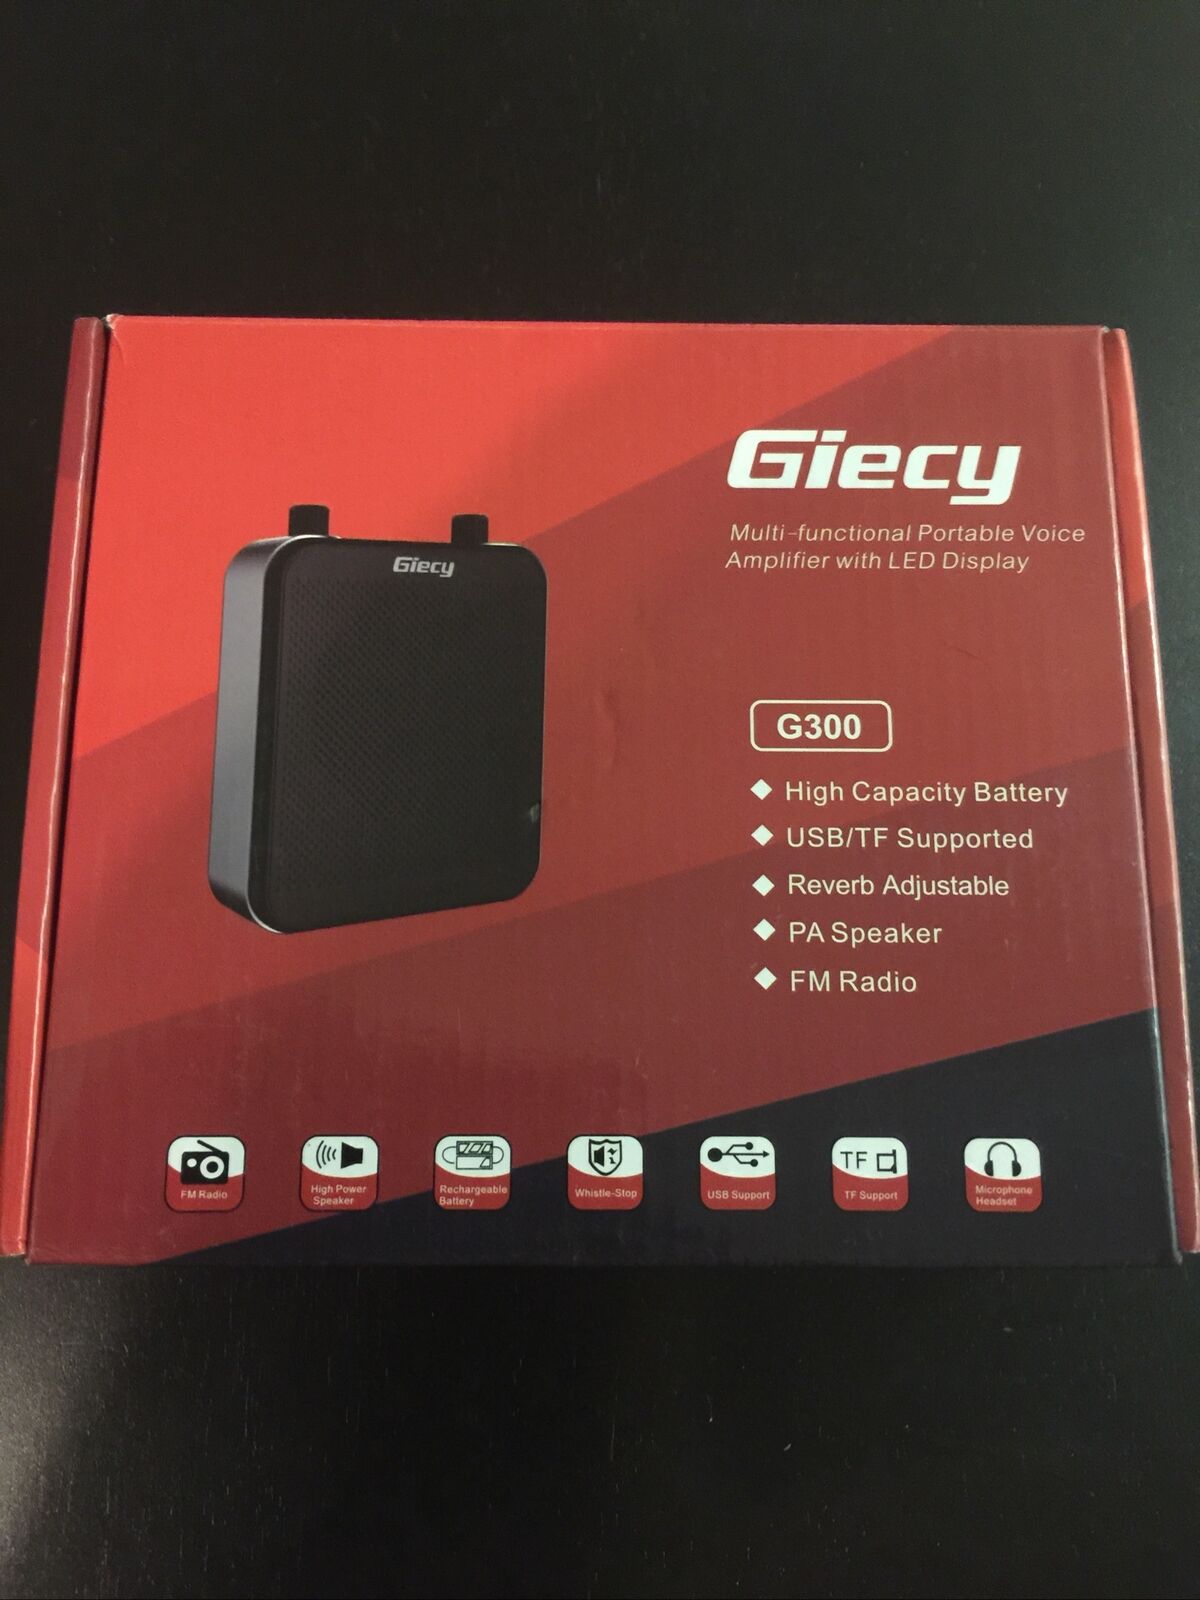 Giecy G300 Voice Amplifier Portable Rechargeable PA System-NEW-FREE SHIPPING